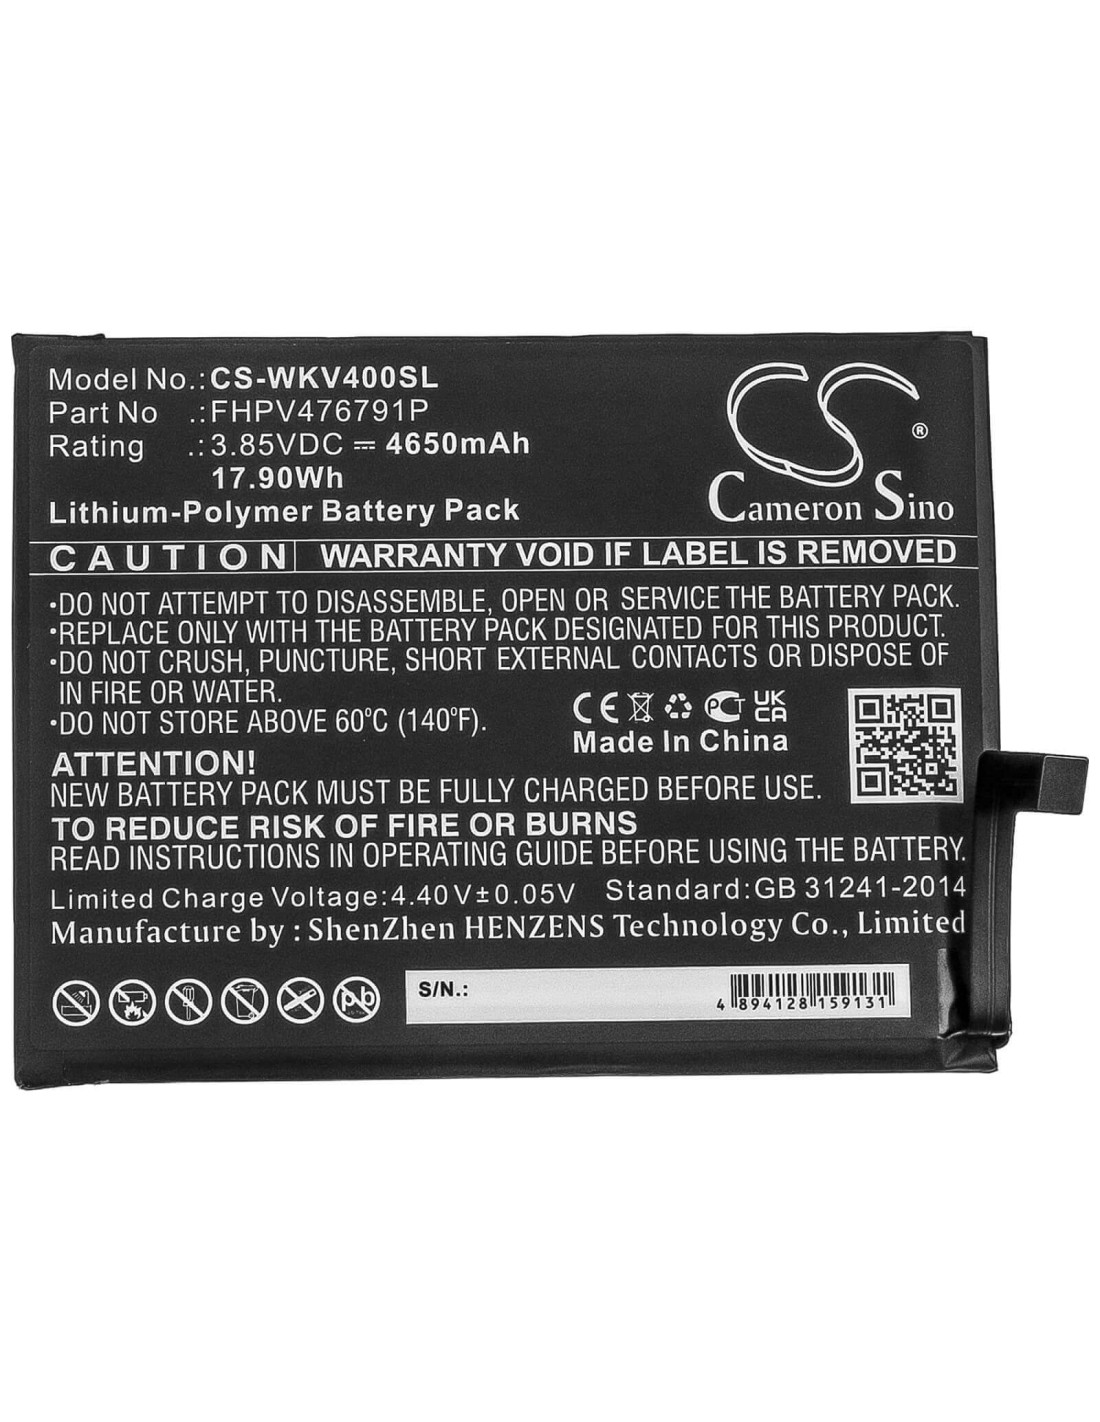 Battery for Wiko, View 4 3.85V, 4650mAh - 17.90Wh